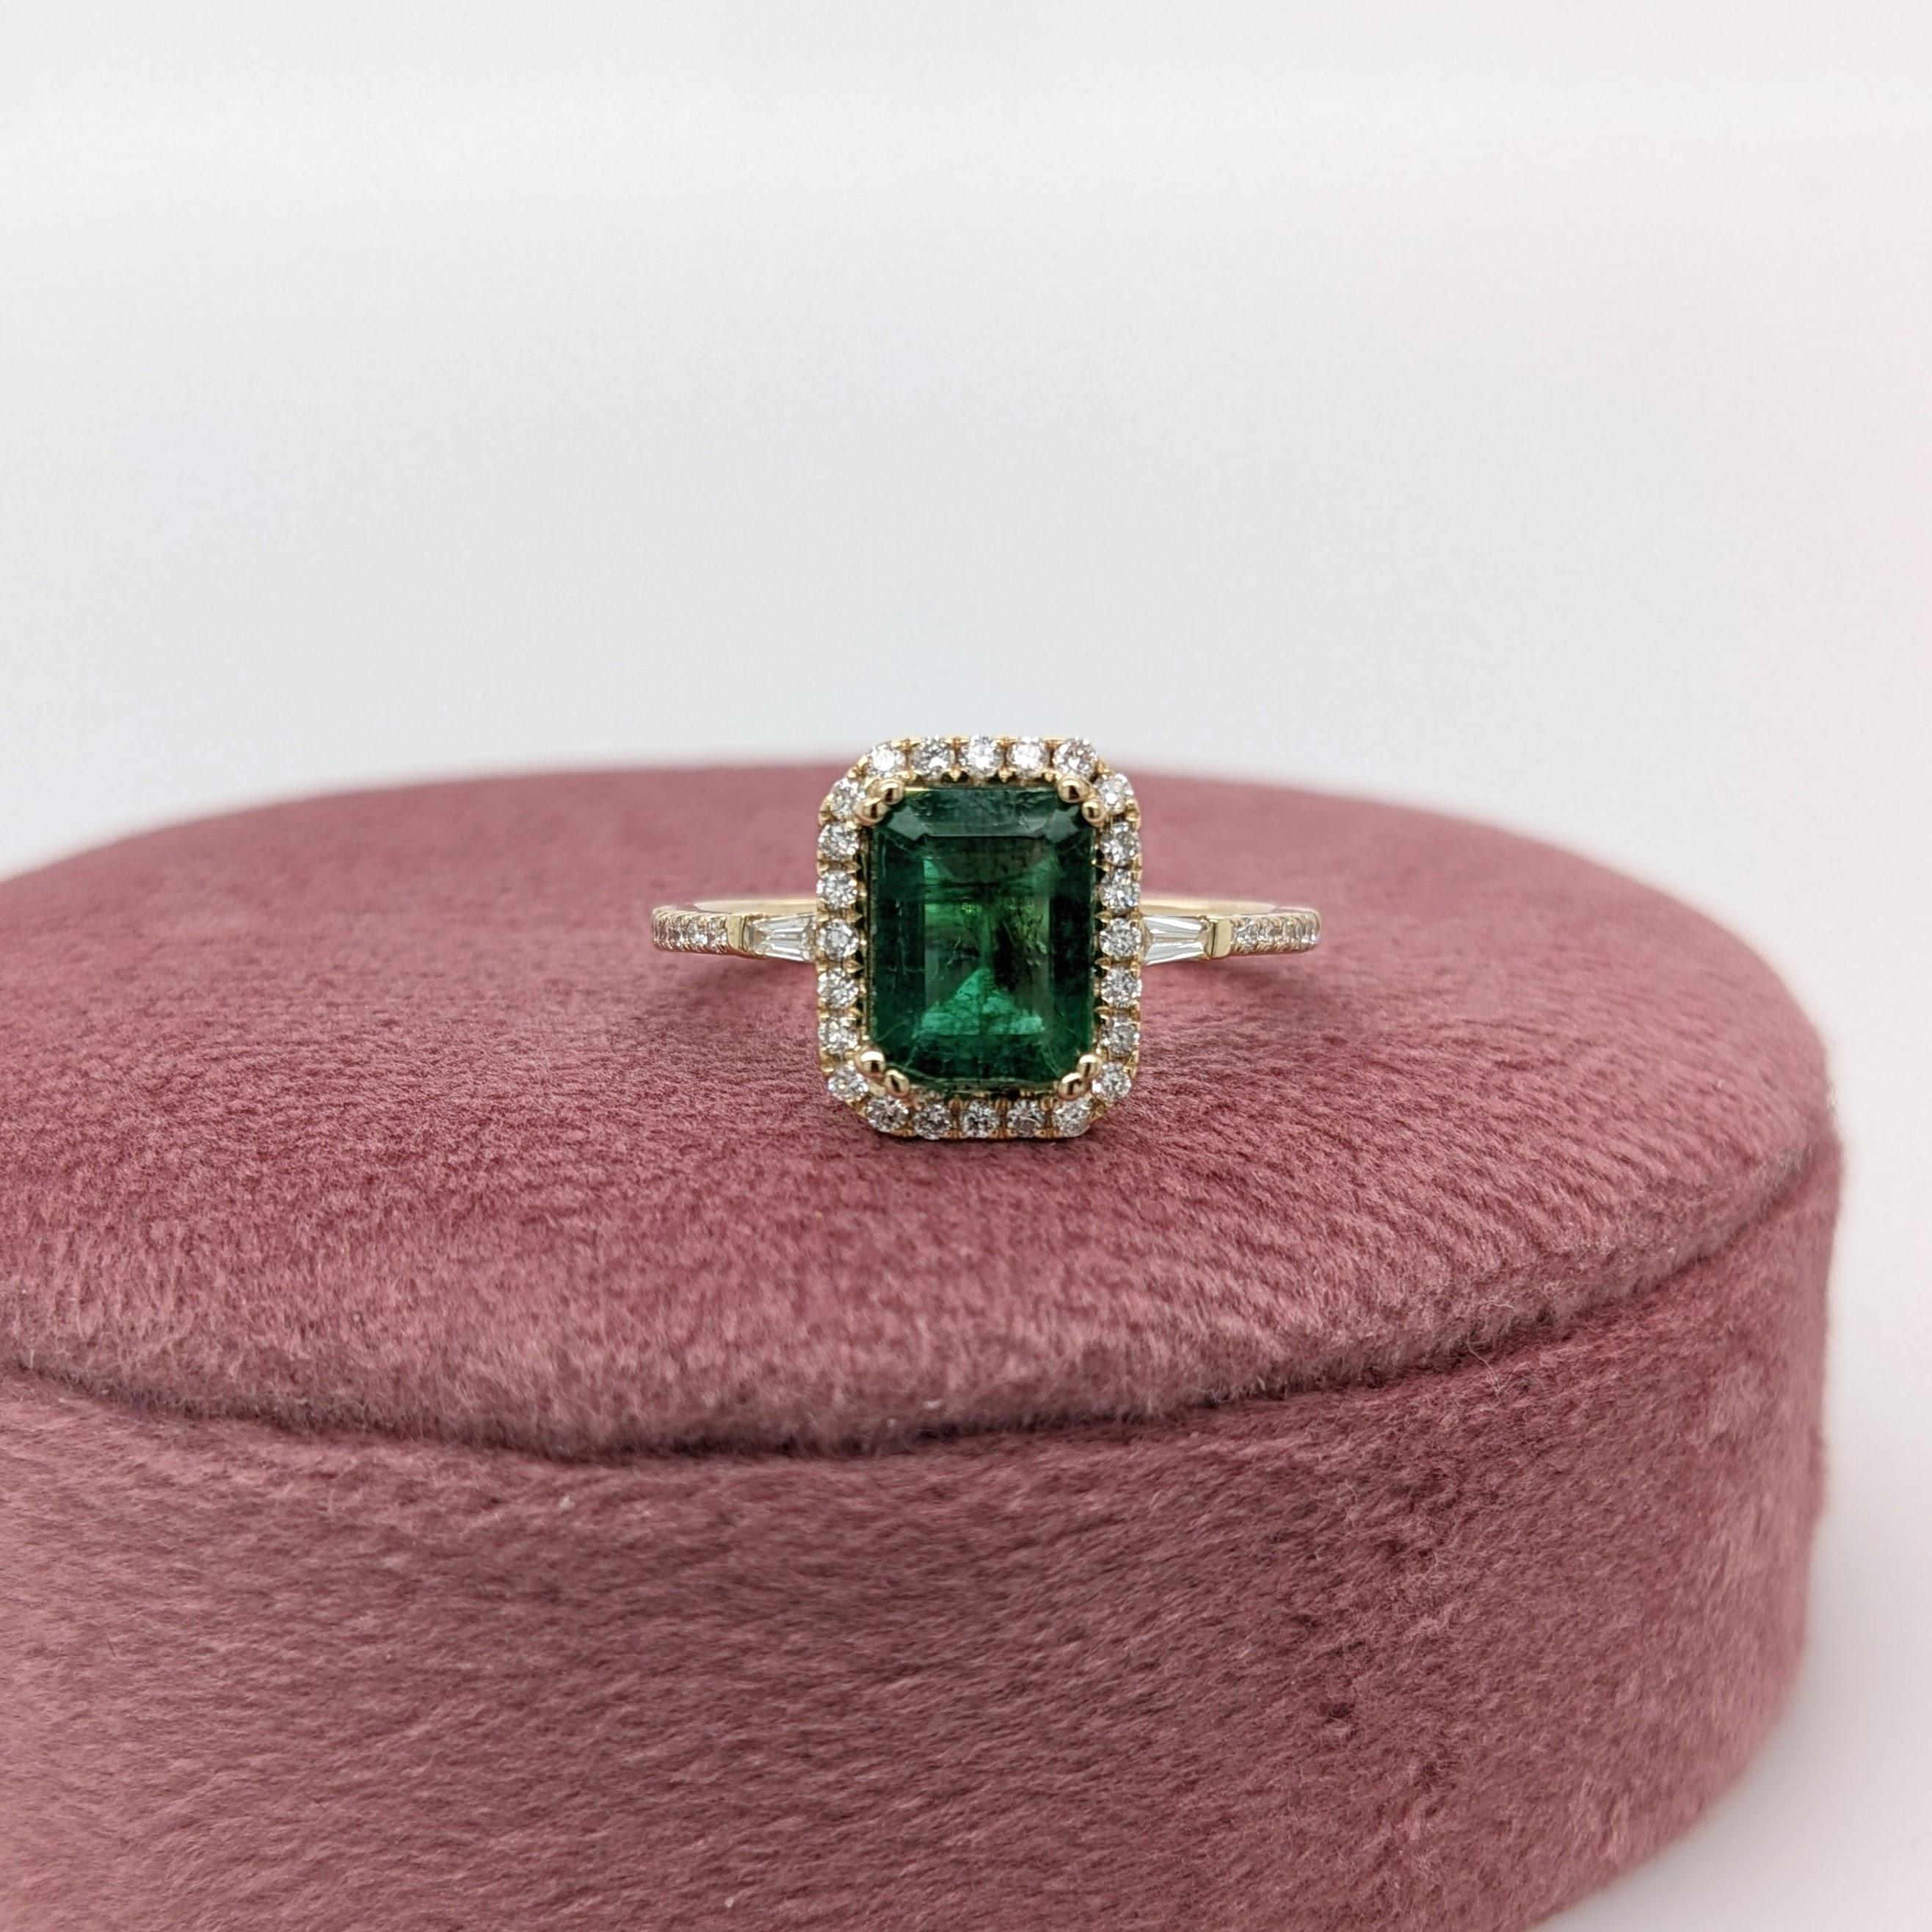 This ring features a beautiful emerald set in a classic NNJ Designs halo ring setting with sparkling natural diamonds all set in 14k solid yellow gold. This design features two tapered baguette diamond accents in the shank. A gorgeous modern look